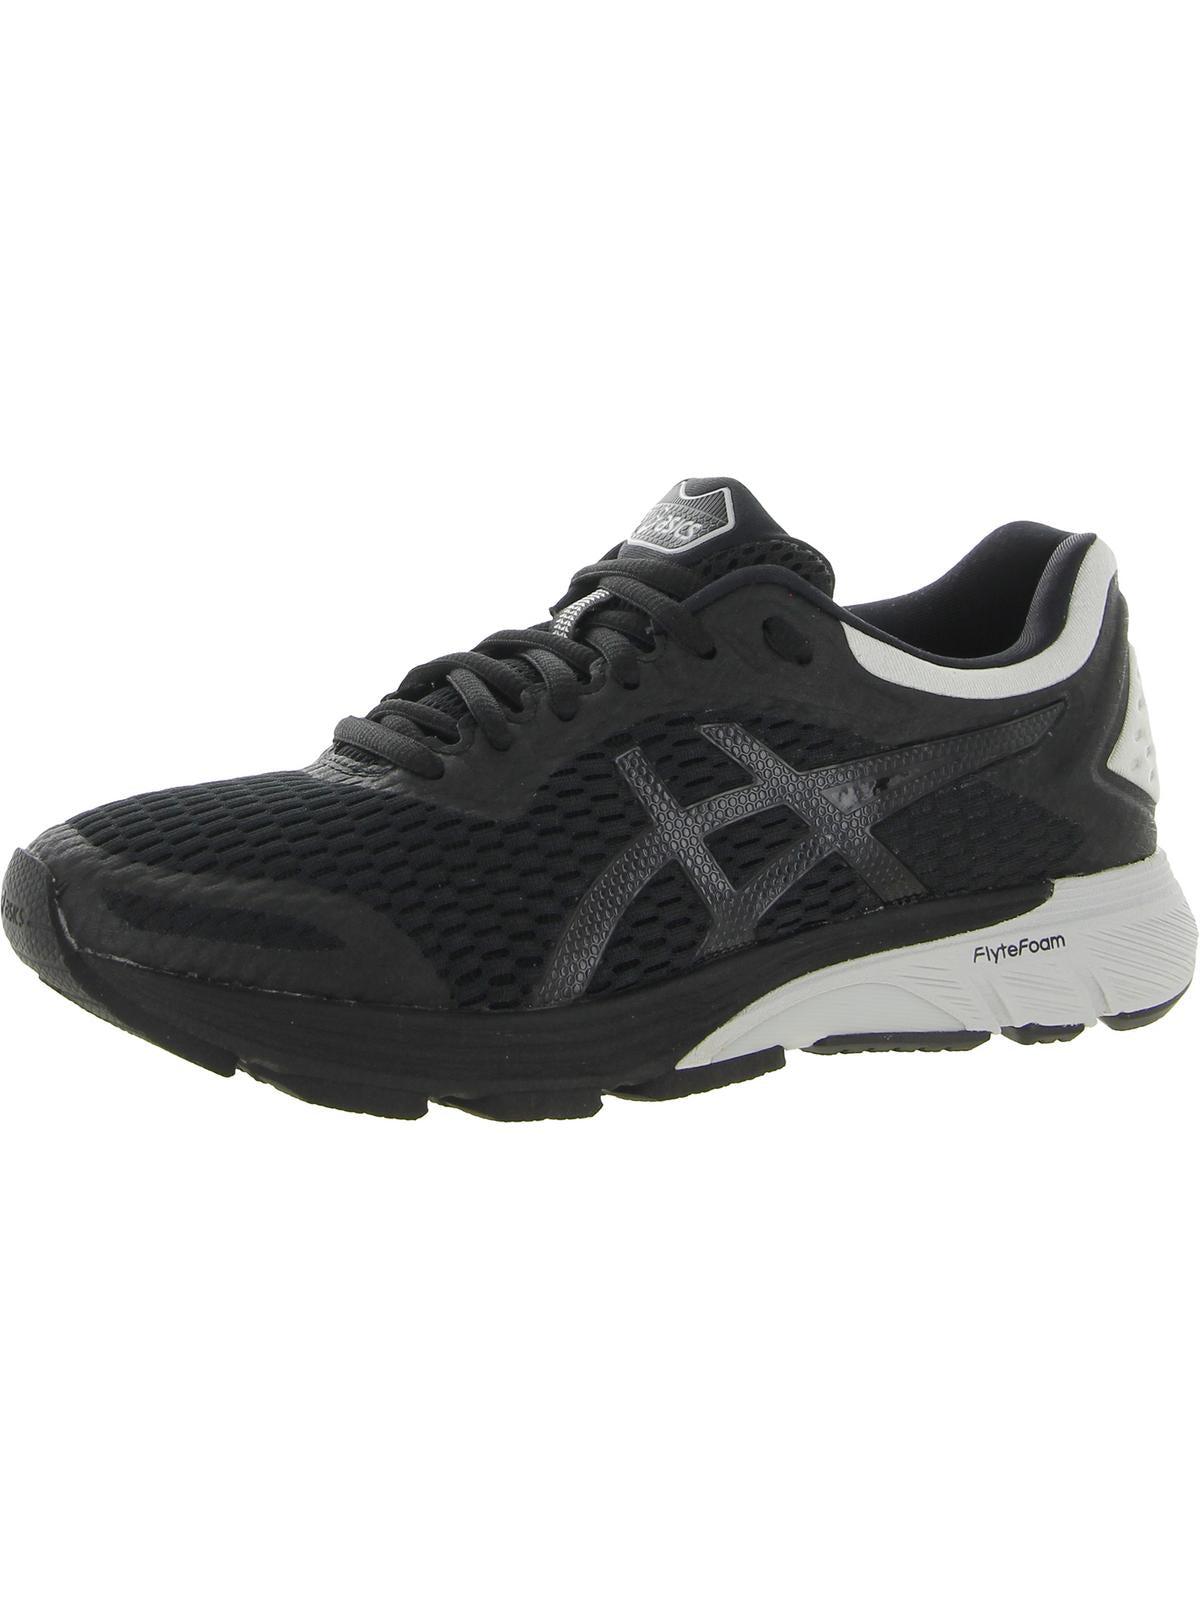 Asics Gt-4000 Fitness Gym Running Shoes in Black | Lyst